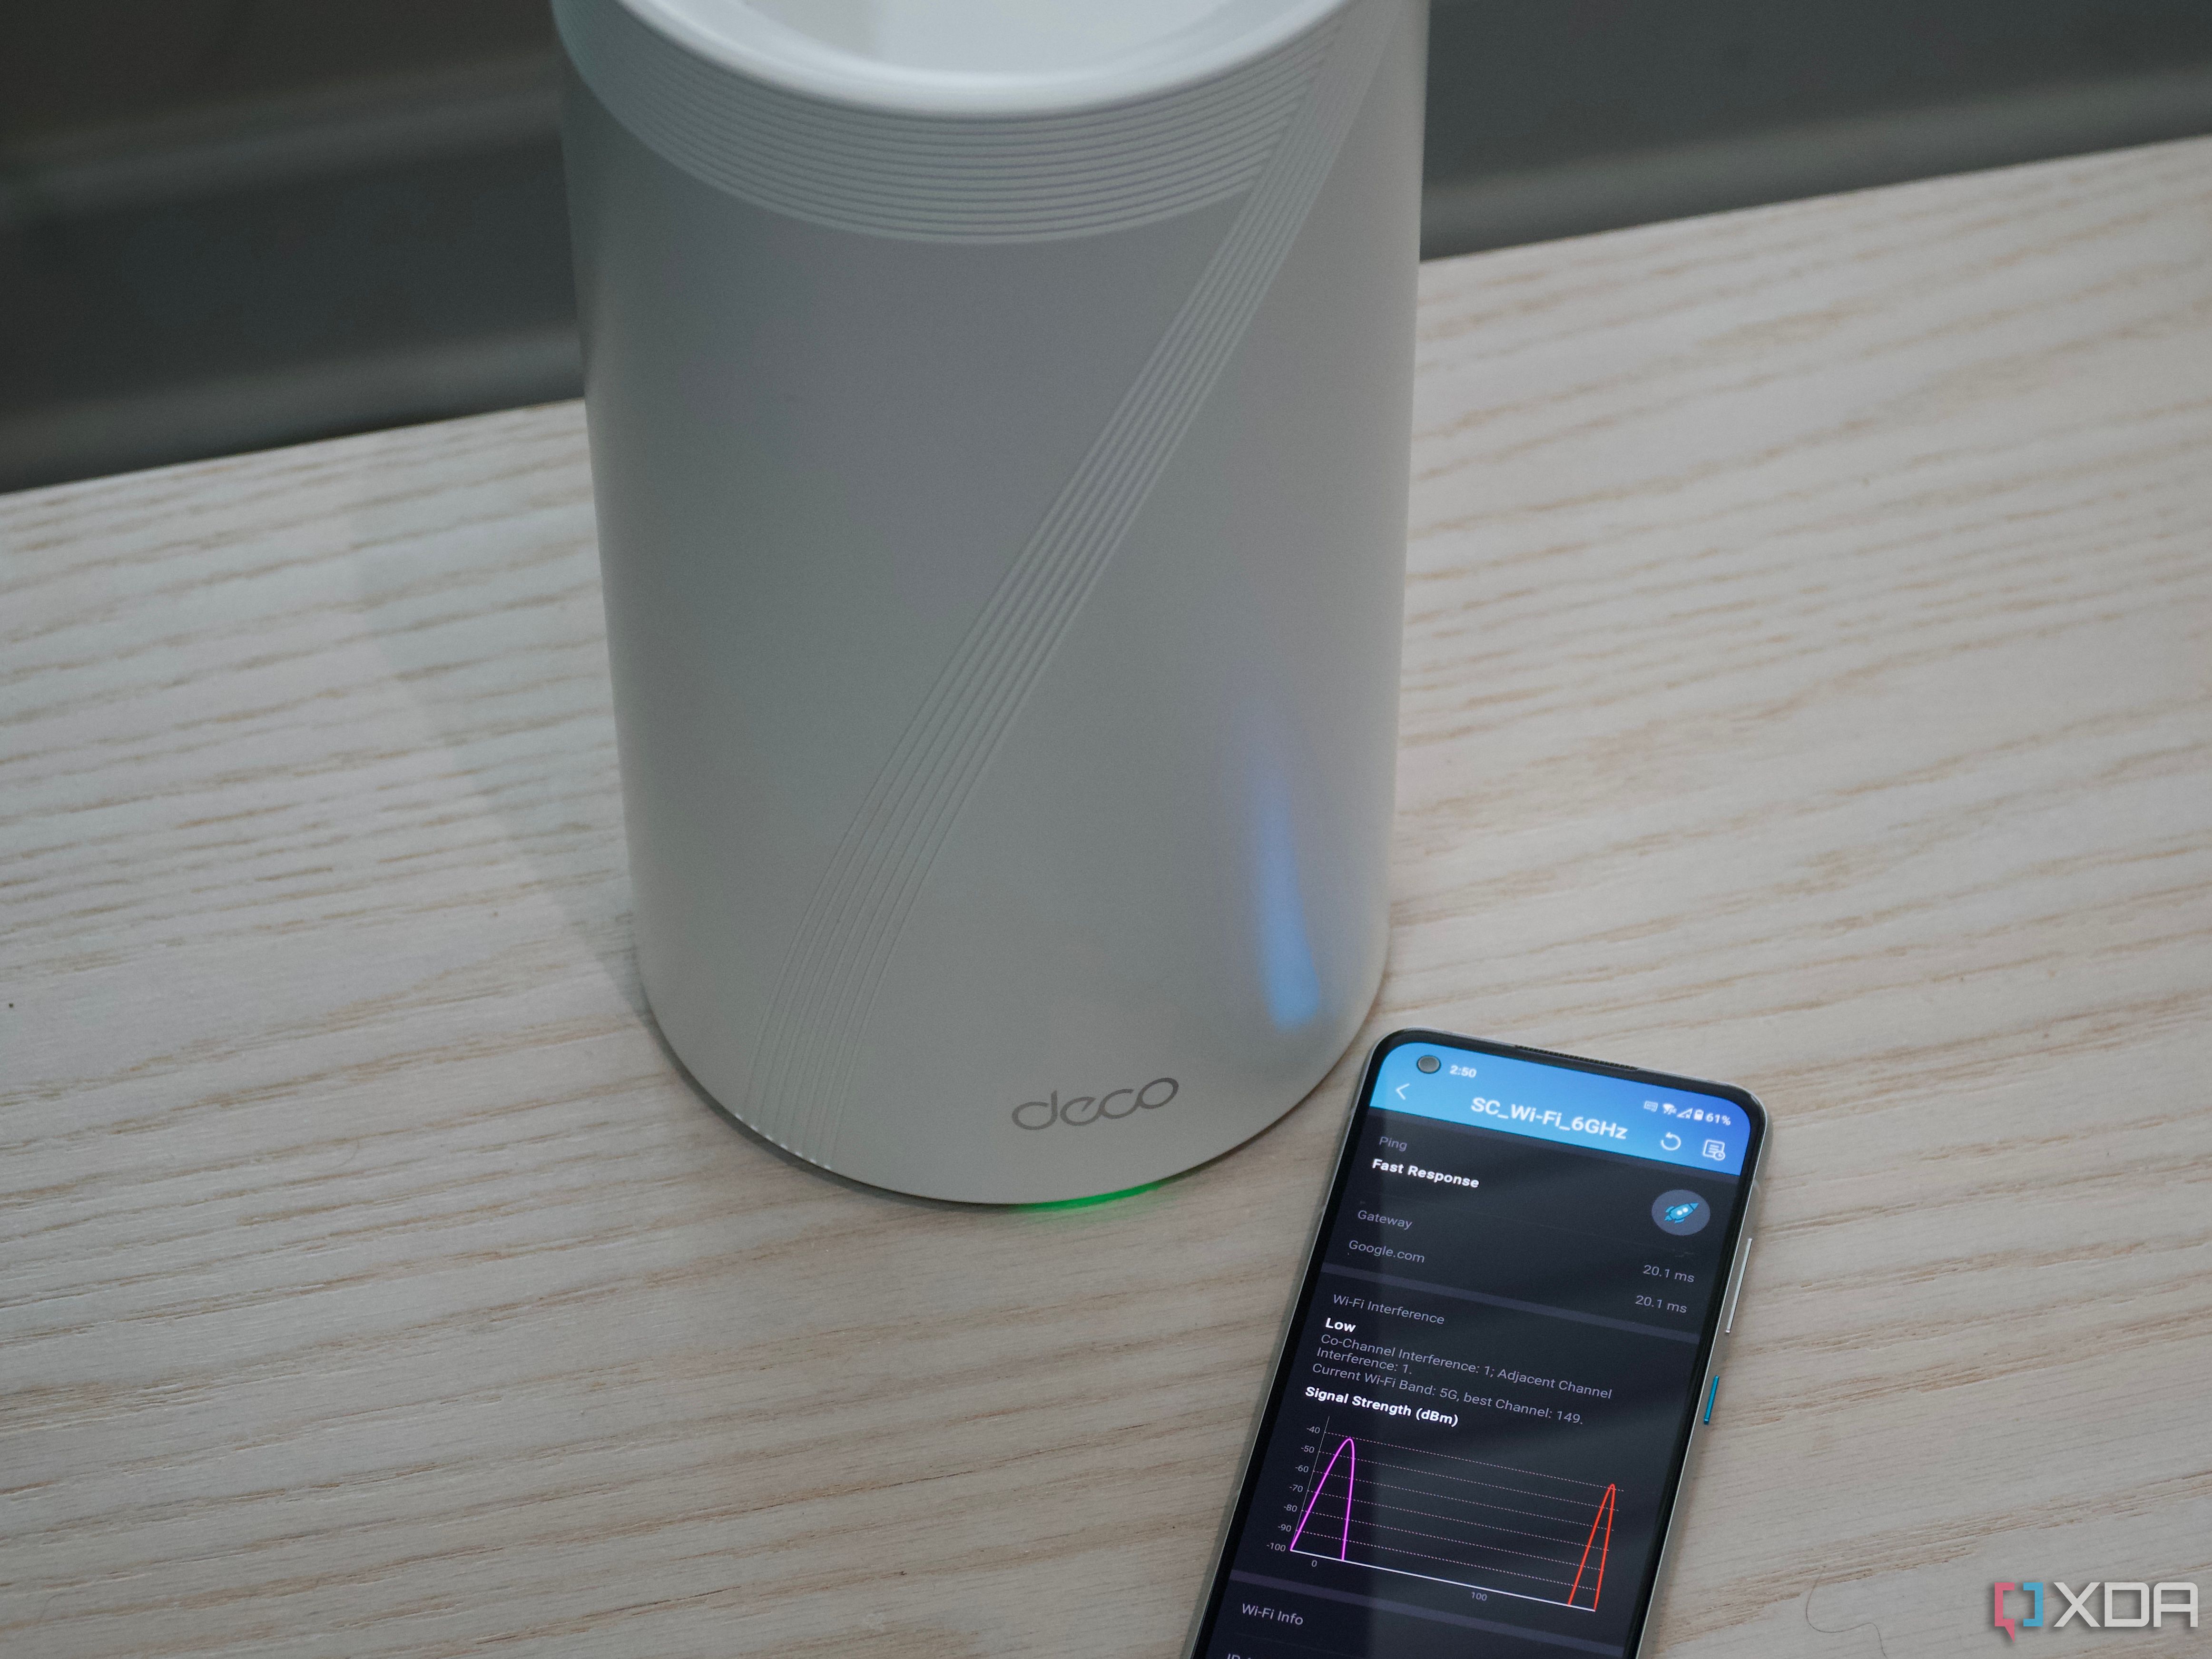 TP-Link Deco BE85 mesh system: An Android phone with the Deco app